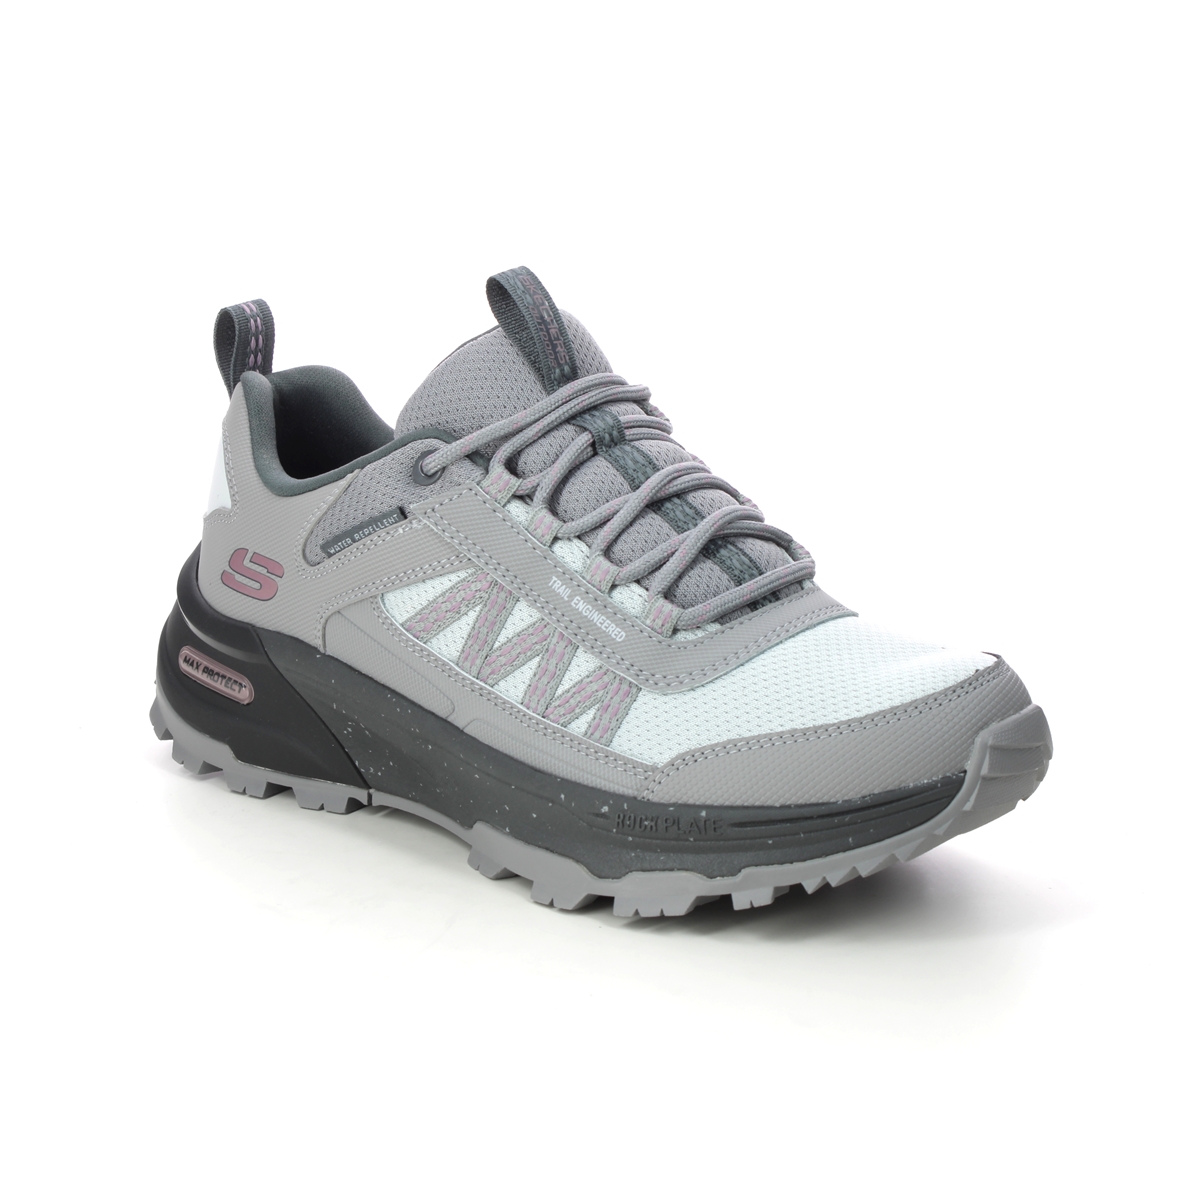 Skechers Max Protect Womens GYCC Grey Charcoal Womens Walking Shoes 180201 in a Plain Leather and Man-made in Size 6